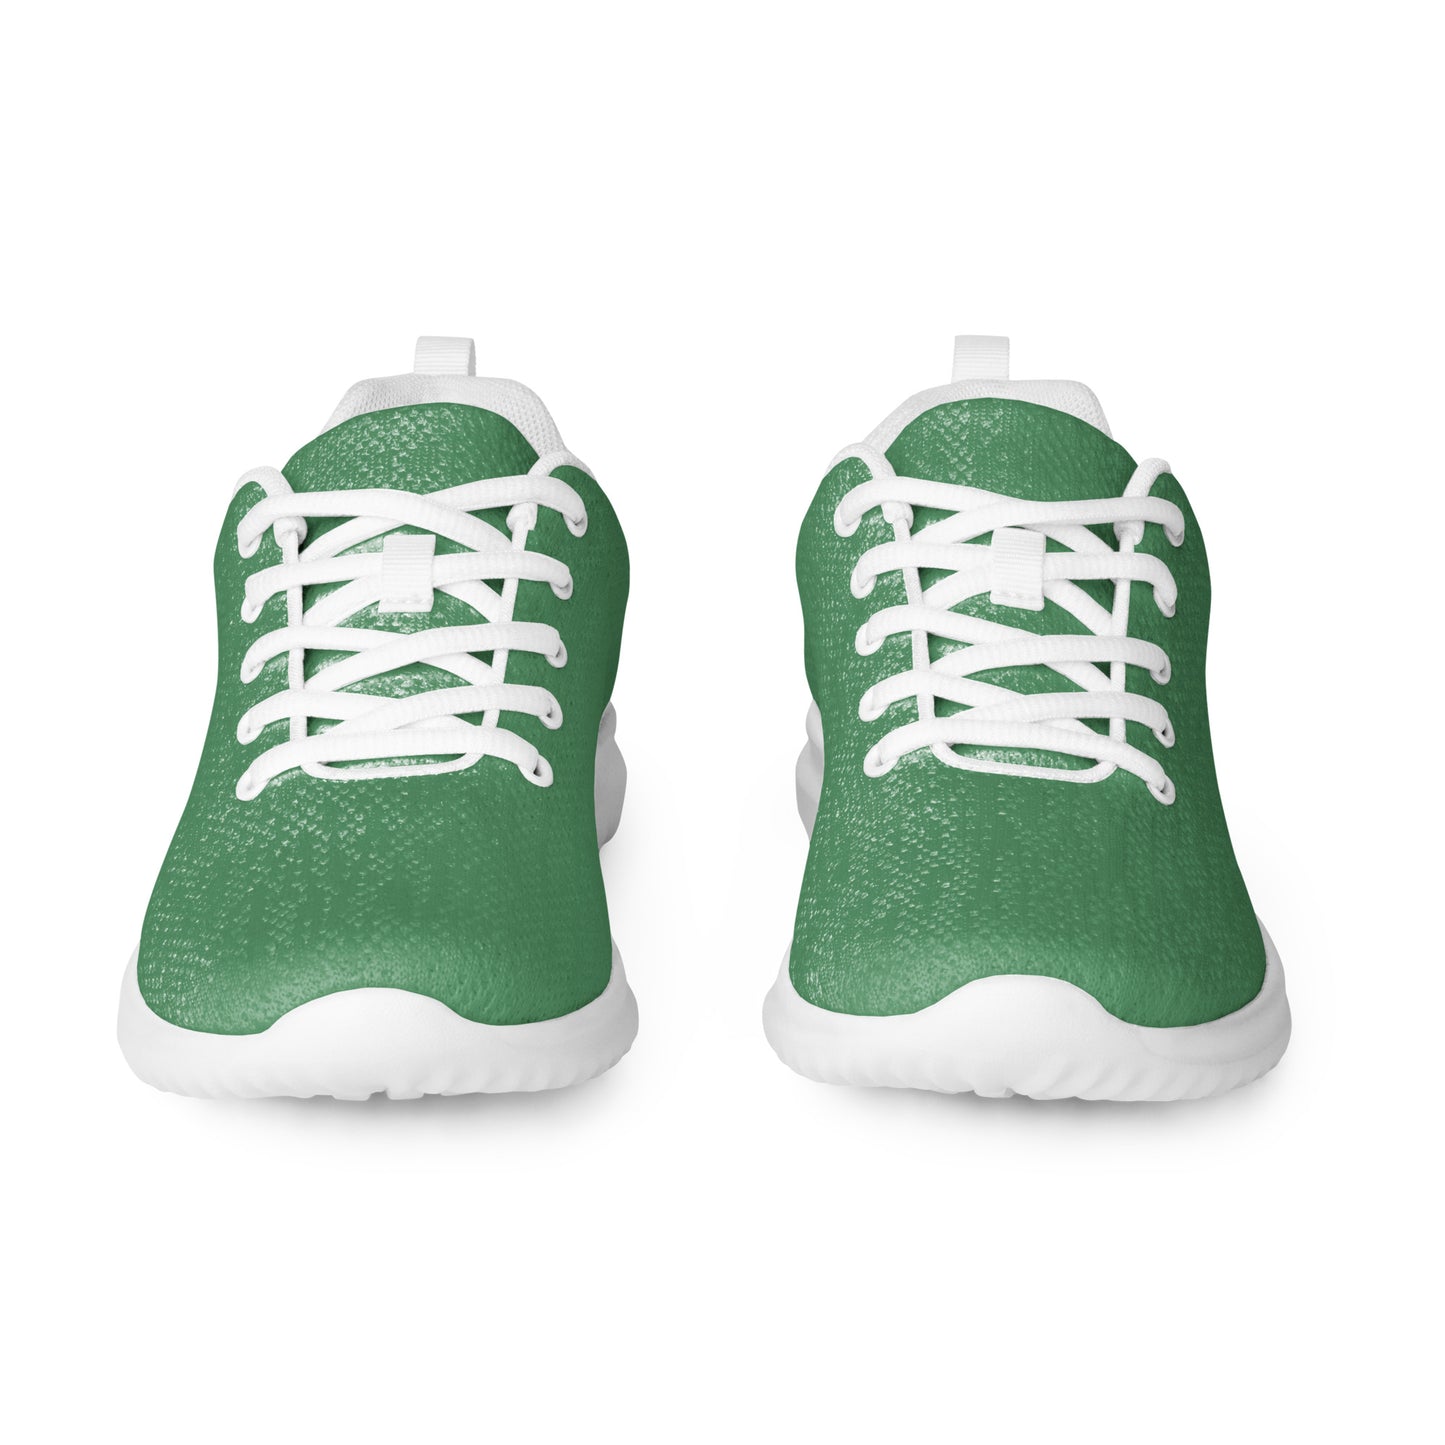 Whirlpool Green Women’s athletic shoes